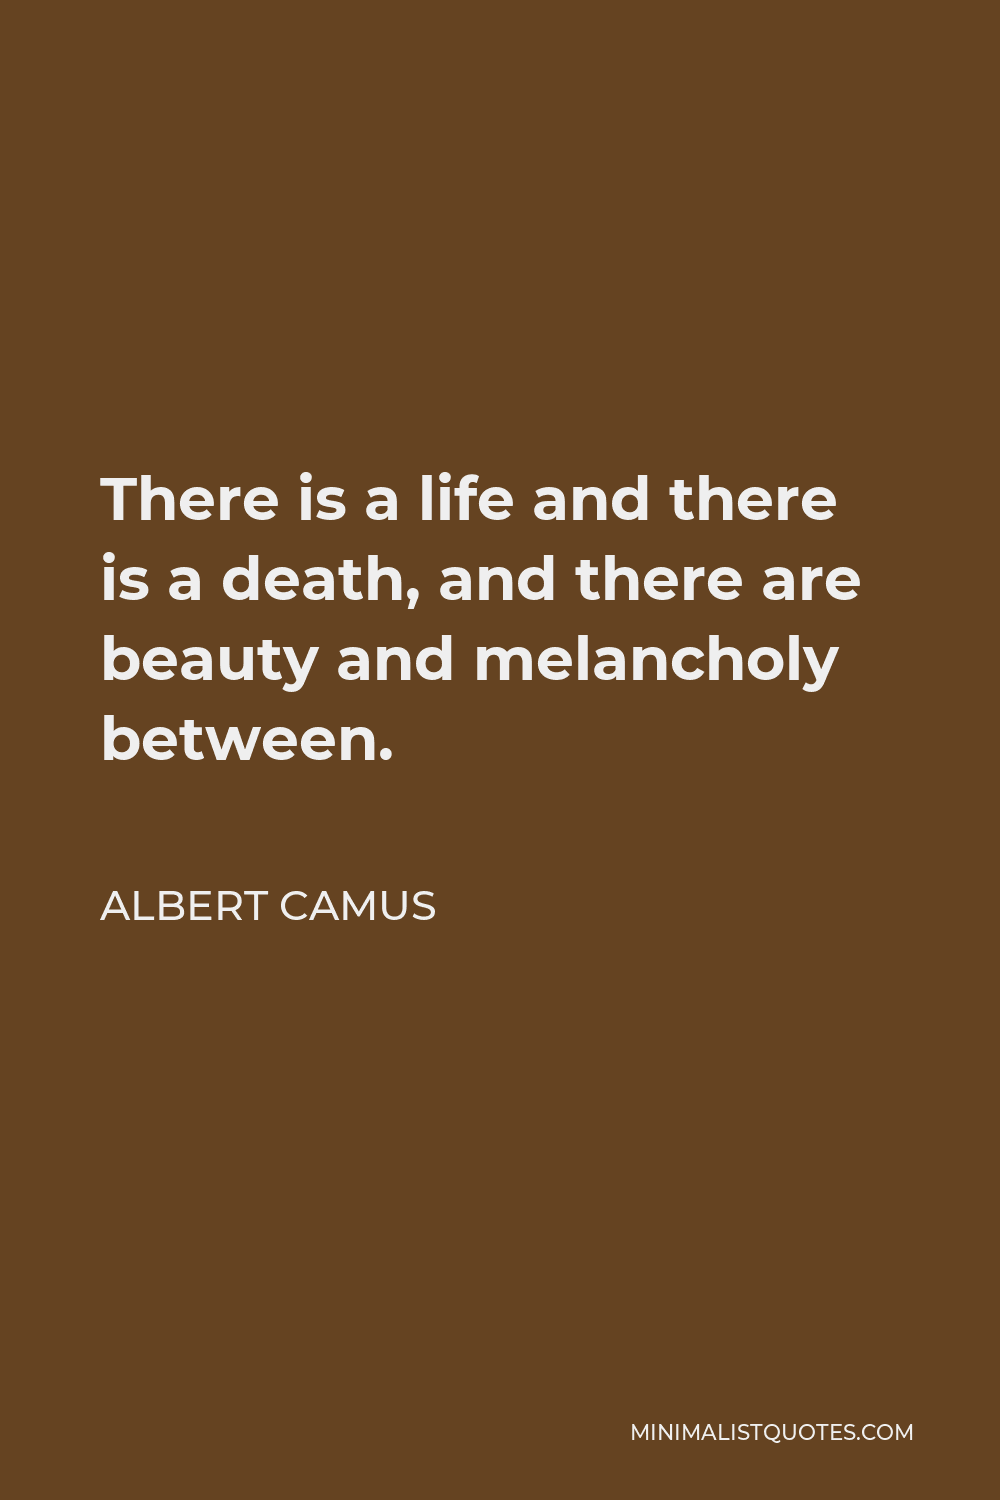 Albert Camus Quote - There is a life and there is a death, and there are beauty and melancholy between.